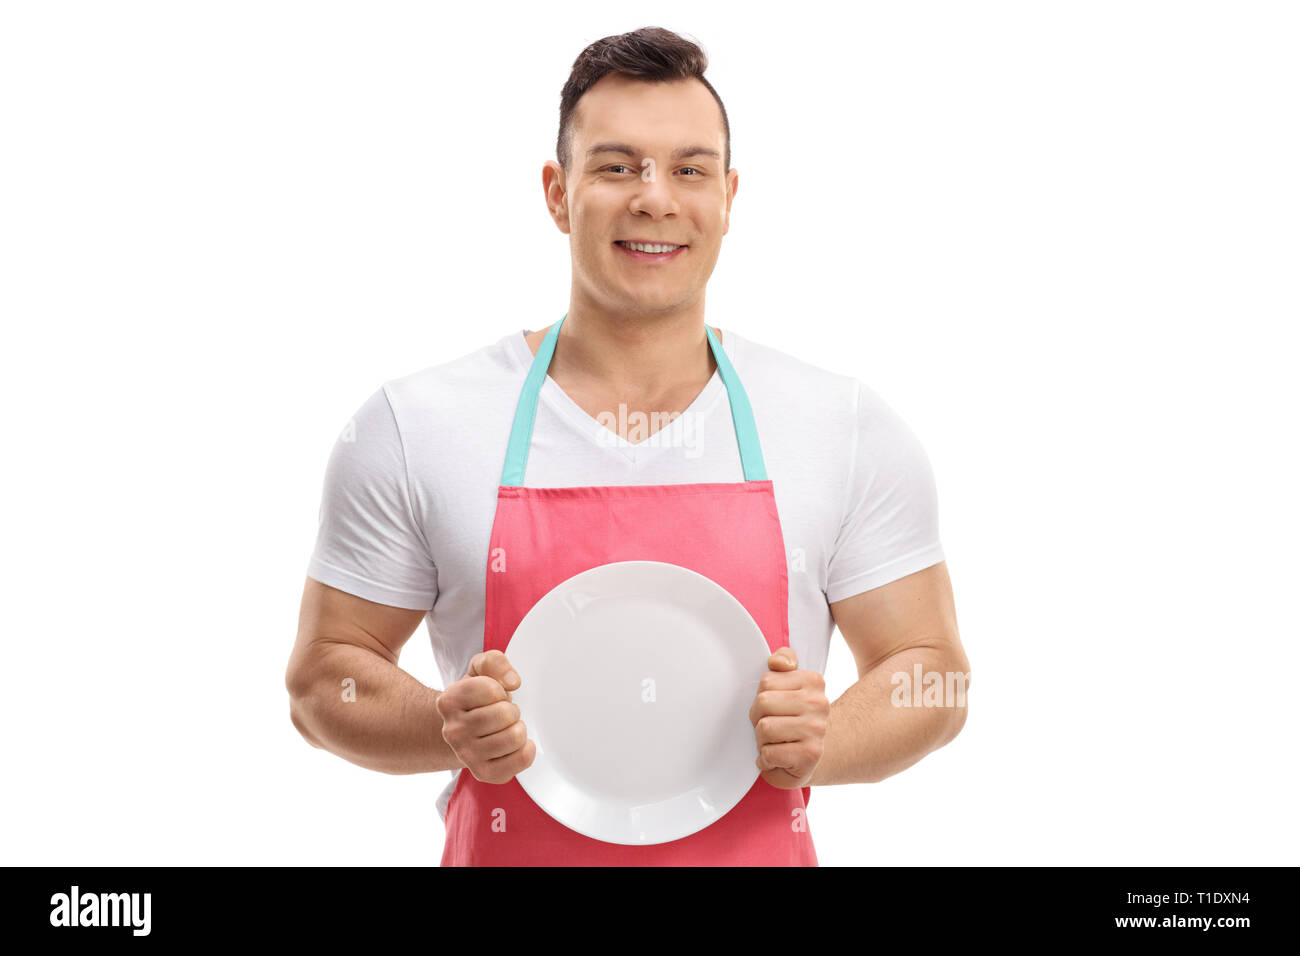 Young guy in an apron showing a clean plate isolated on white background Stock Photo